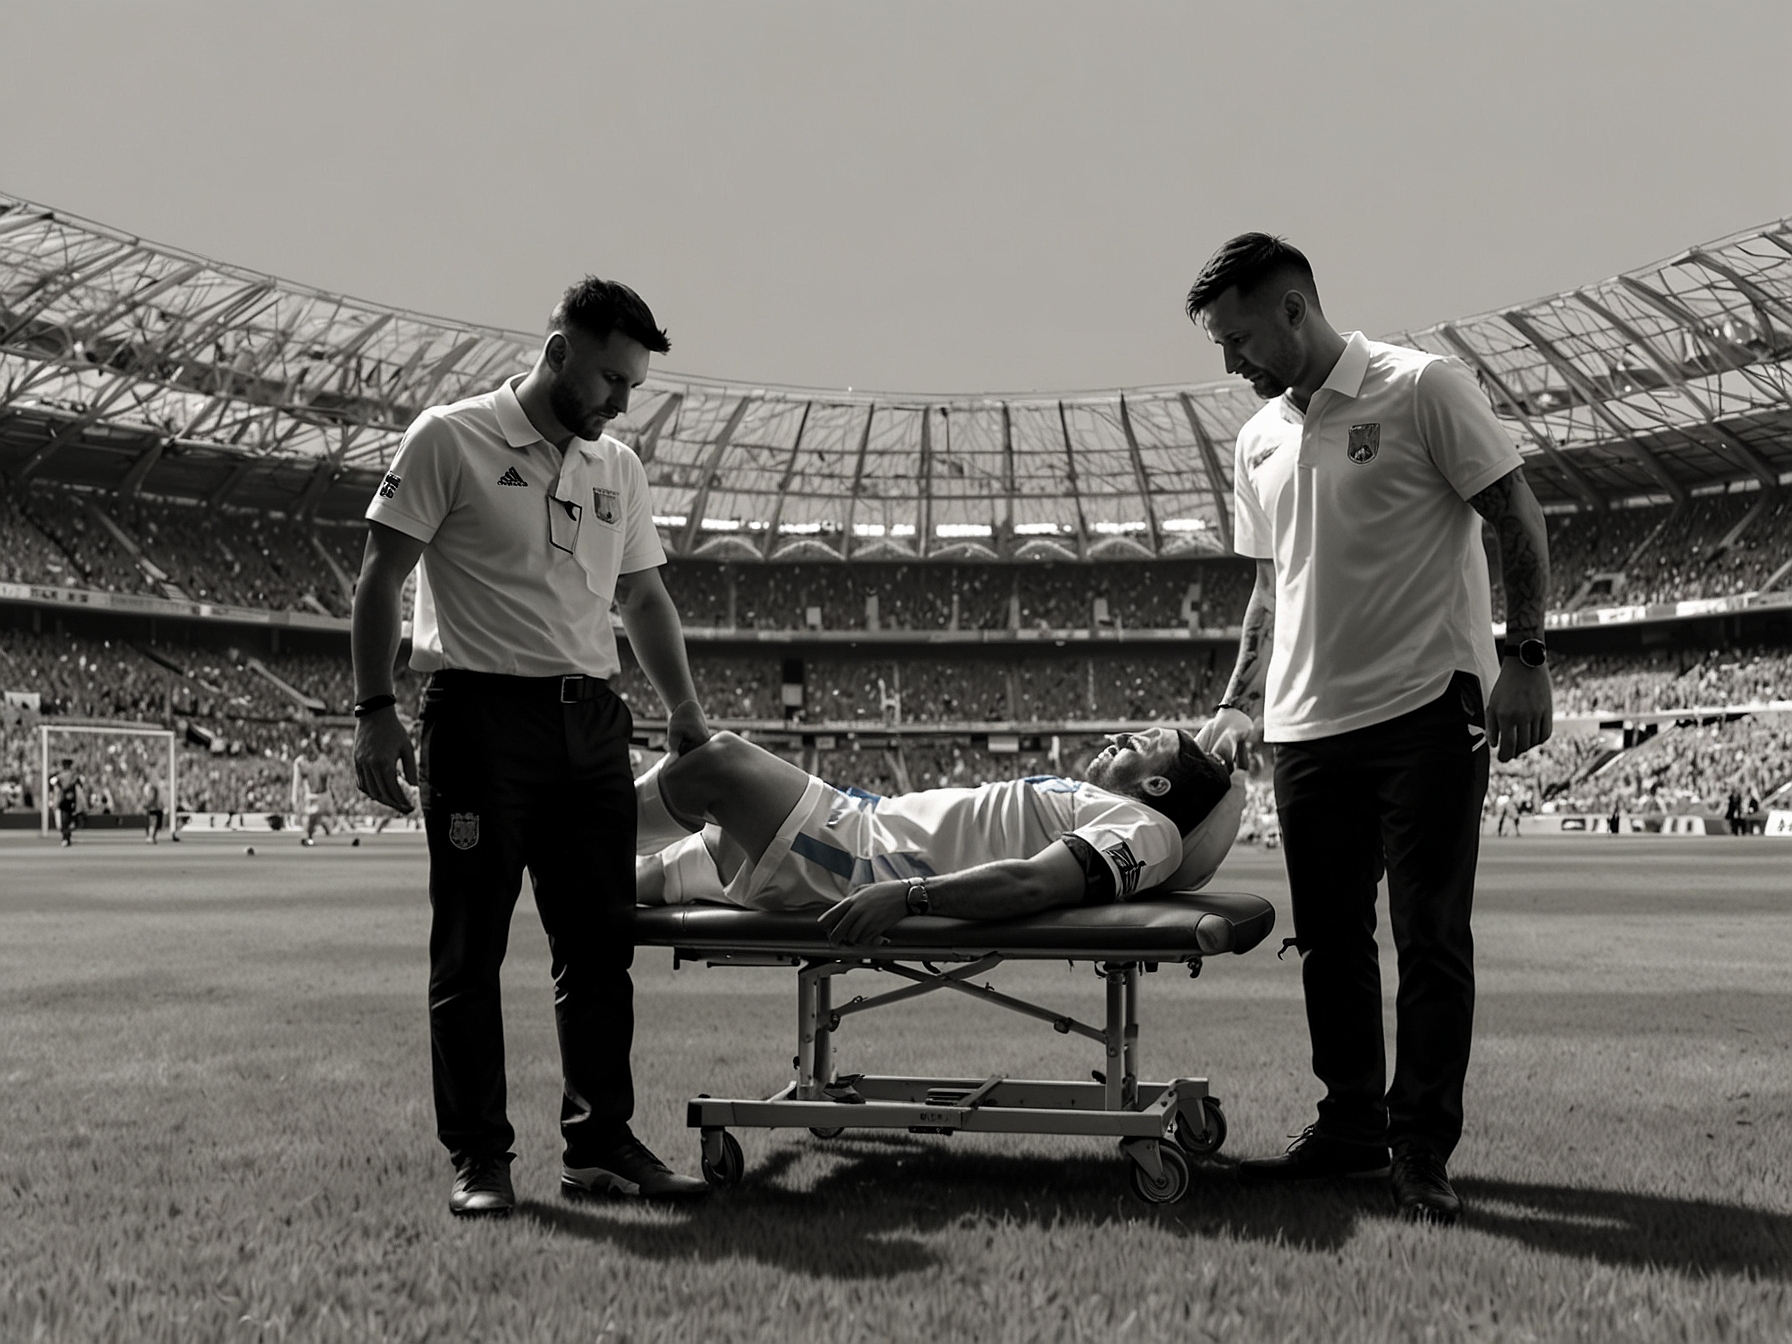 Image of Lionel Messi receiving medical treatment on the field during the match against Chile, illustrating the leg niggle that raised concerns about his fitness.